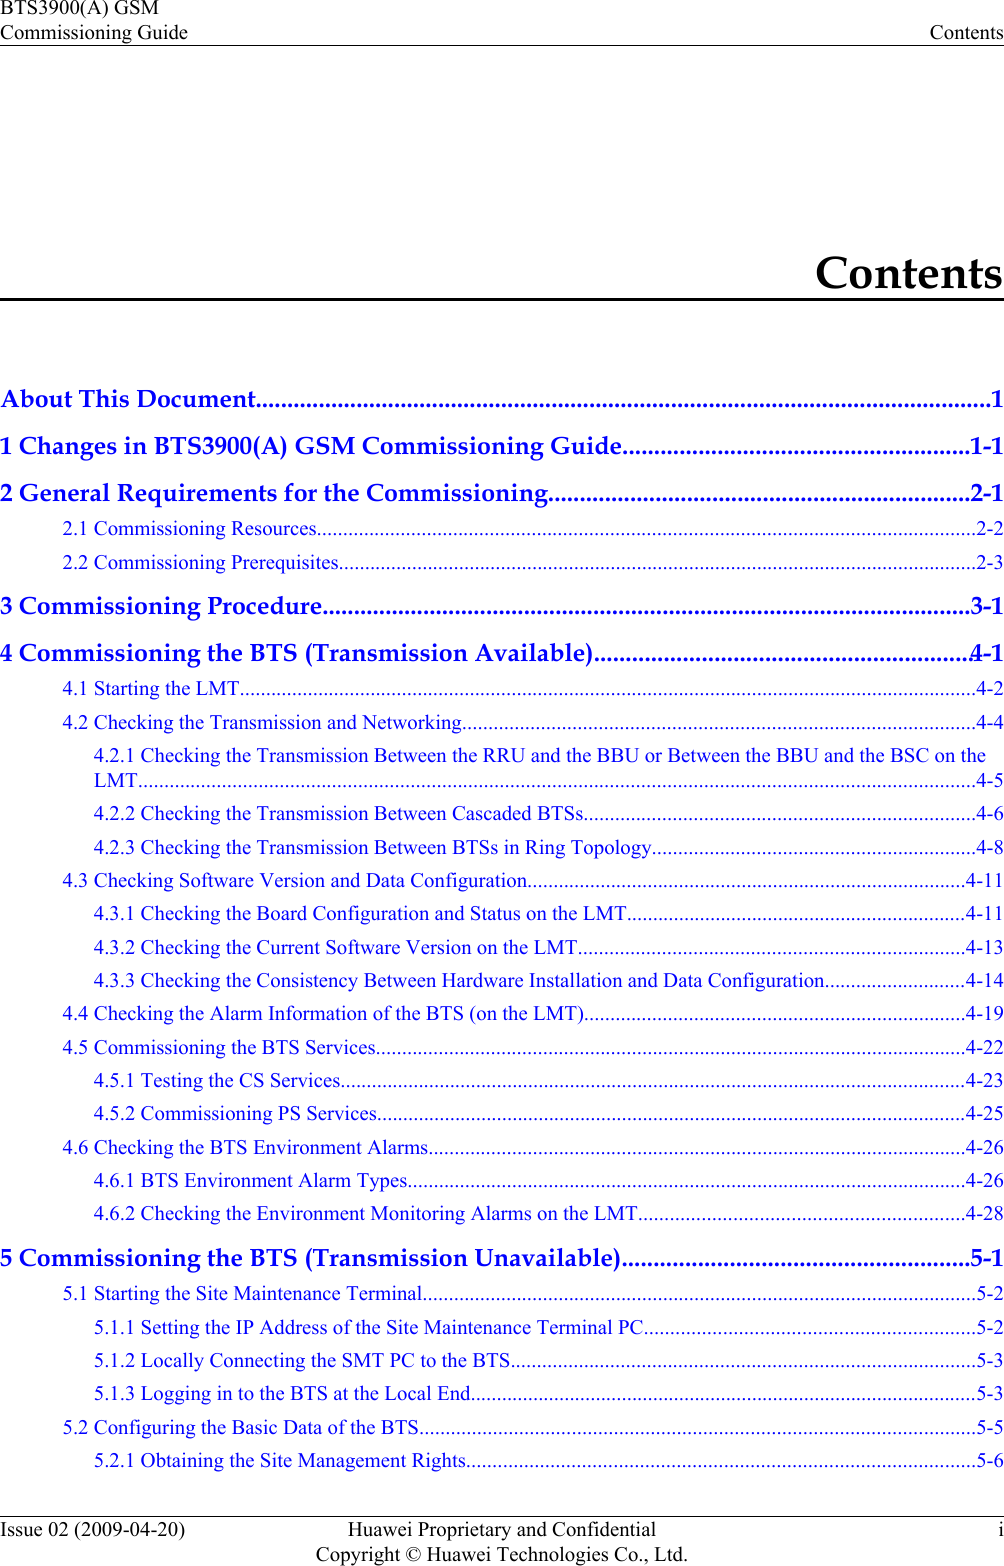 ContentsAbout This Document.....................................................................................................................11 Changes in BTS3900(A) GSM Commissioning Guide.......................................................1-12 General Requirements for the Commissioning...................................................................2-12.1 Commissioning Resources..............................................................................................................................2-22.2 Commissioning Prerequisites..........................................................................................................................2-33 Commissioning Procedure.......................................................................................................3-14 Commissioning the BTS (Transmission Available)............................................................4-14.1 Starting the LMT.............................................................................................................................................4-24.2 Checking the Transmission and Networking..................................................................................................4-44.2.1 Checking the Transmission Between the RRU and the BBU or Between the BBU and the BSC on theLMT................................................................................................................................................................4-54.2.2 Checking the Transmission Between Cascaded BTSs...........................................................................4-64.2.3 Checking the Transmission Between BTSs in Ring Topology..............................................................4-84.3 Checking Software Version and Data Configuration....................................................................................4-114.3.1 Checking the Board Configuration and Status on the LMT.................................................................4-114.3.2 Checking the Current Software Version on the LMT..........................................................................4-134.3.3 Checking the Consistency Between Hardware Installation and Data Configuration...........................4-144.4 Checking the Alarm Information of the BTS (on the LMT).........................................................................4-194.5 Commissioning the BTS Services.................................................................................................................4-224.5.1 Testing the CS Services........................................................................................................................4-234.5.2 Commissioning PS Services.................................................................................................................4-254.6 Checking the BTS Environment Alarms.......................................................................................................4-264.6.1 BTS Environment Alarm Types...........................................................................................................4-264.6.2 Checking the Environment Monitoring Alarms on the LMT..............................................................4-285 Commissioning the BTS (Transmission Unavailable).......................................................5-15.1 Starting the Site Maintenance Terminal..........................................................................................................5-25.1.1 Setting the IP Address of the Site Maintenance Terminal PC...............................................................5-25.1.2 Locally Connecting the SMT PC to the BTS.........................................................................................5-35.1.3 Logging in to the BTS at the Local End.................................................................................................5-35.2 Configuring the Basic Data of the BTS..........................................................................................................5-55.2.1 Obtaining the Site Management Rights.................................................................................................5-6BTS3900(A) GSMCommissioning Guide ContentsIssue 02 (2009-04-20) Huawei Proprietary and ConfidentialCopyright © Huawei Technologies Co., Ltd.i